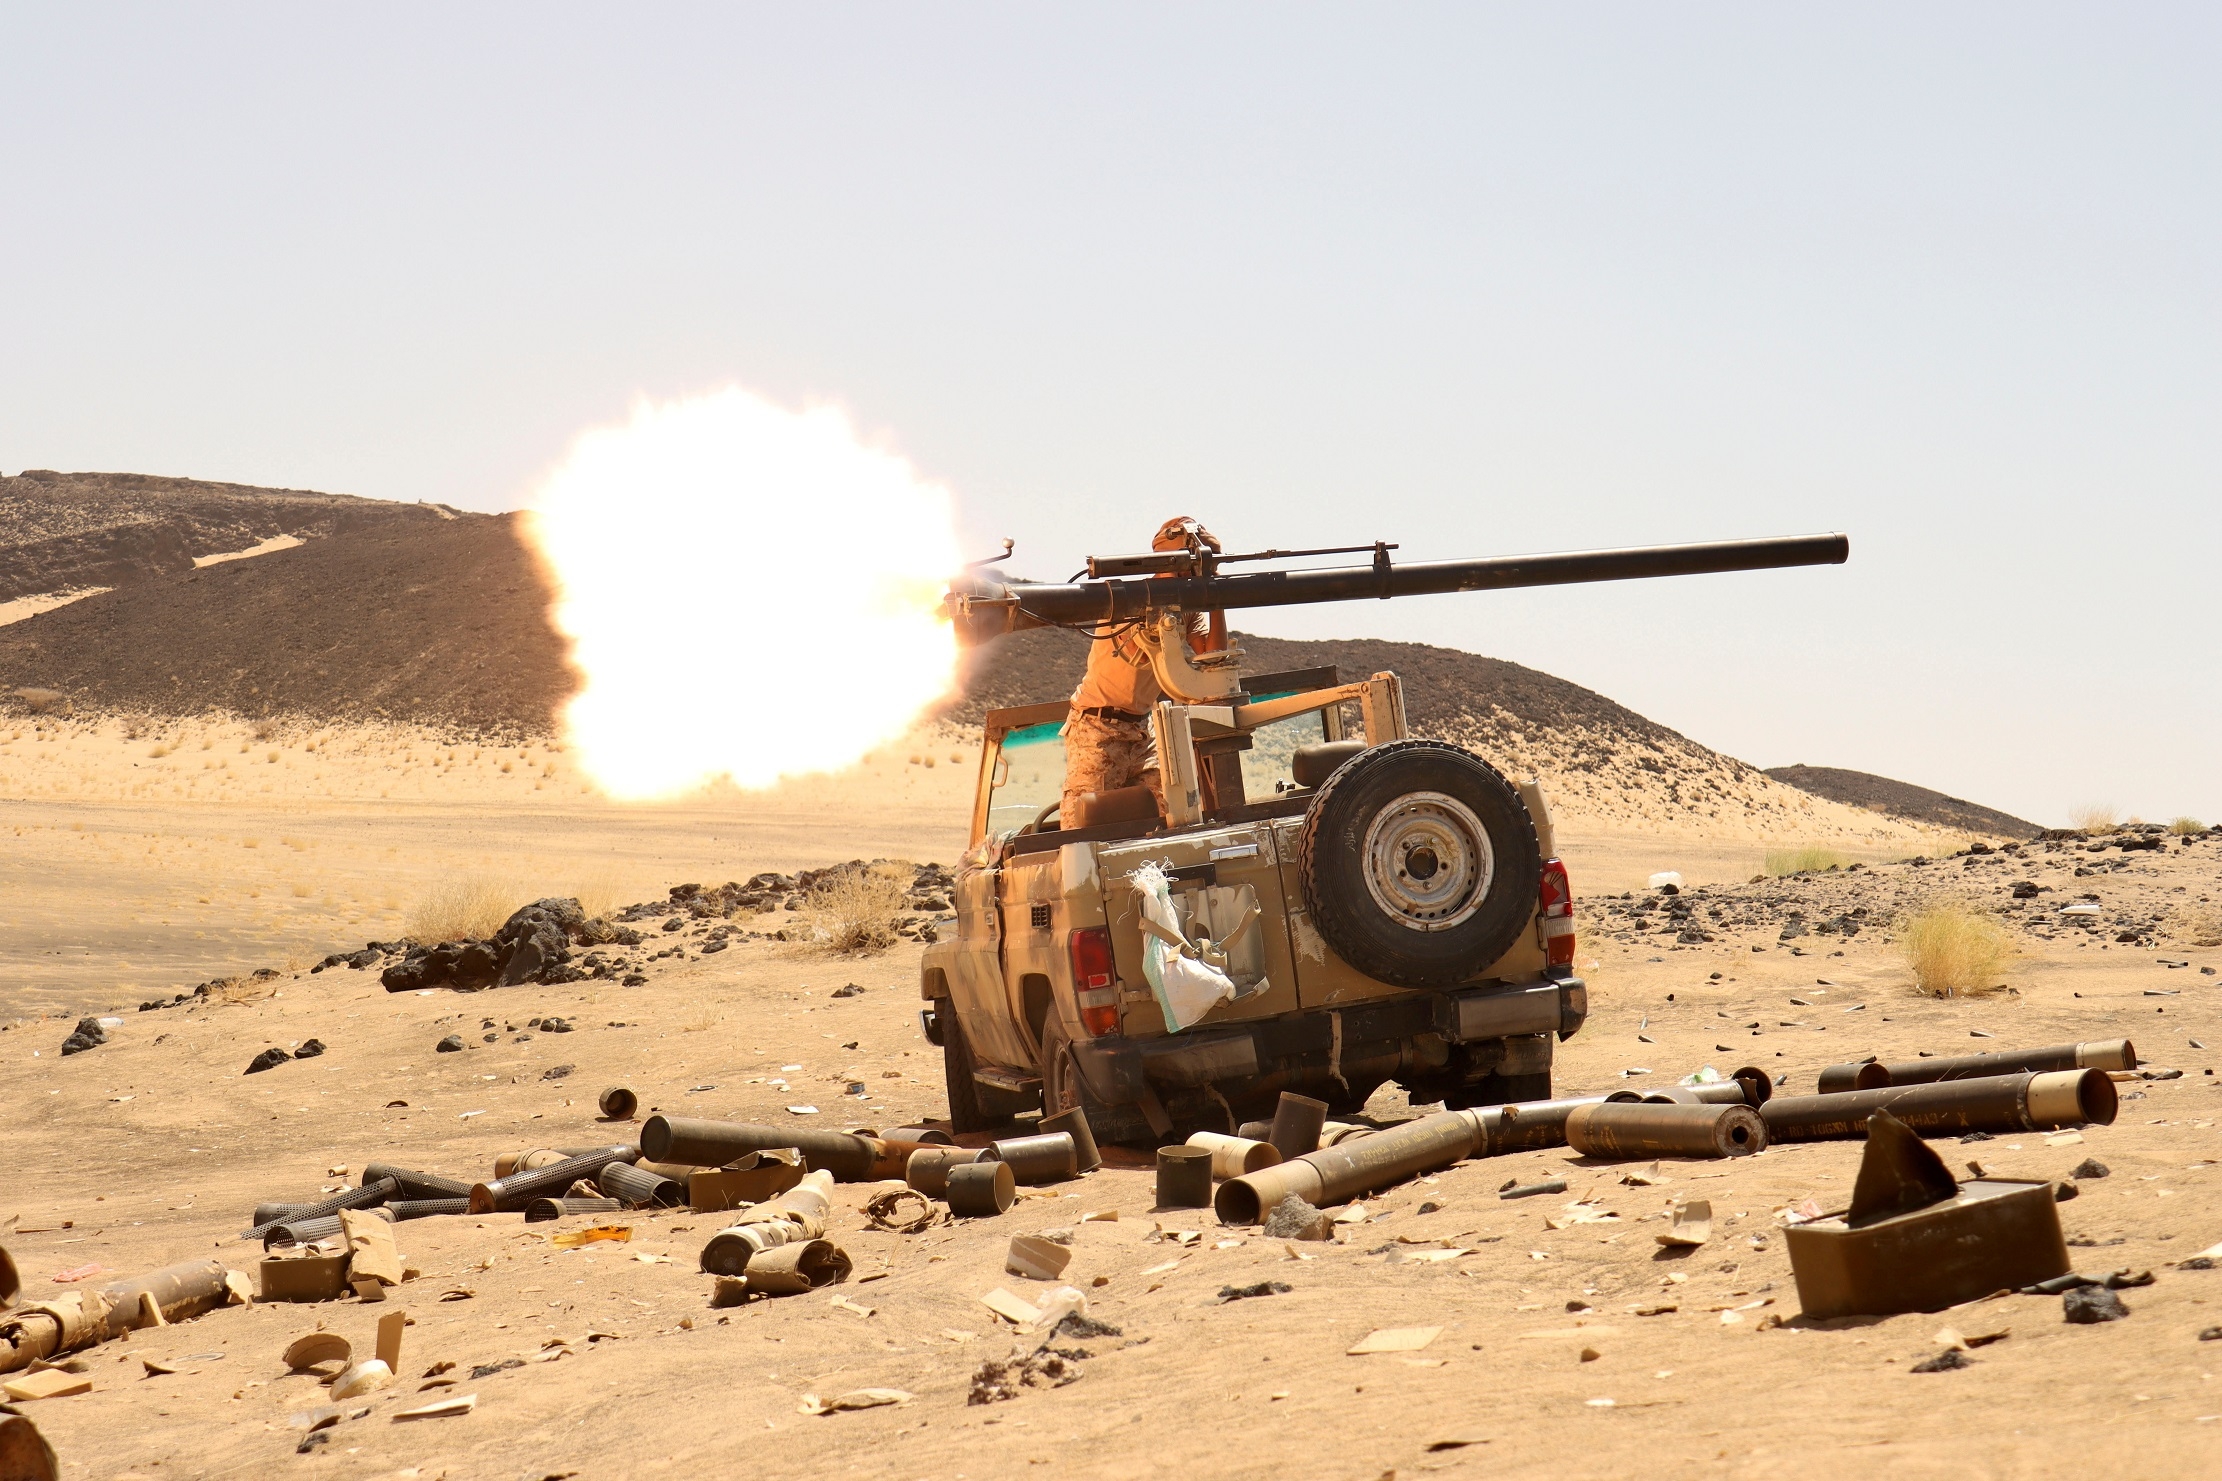 A Yemeni government fighter at a frontline position during fighting against Houthi rebels in Marib, 9 March (Reuters)